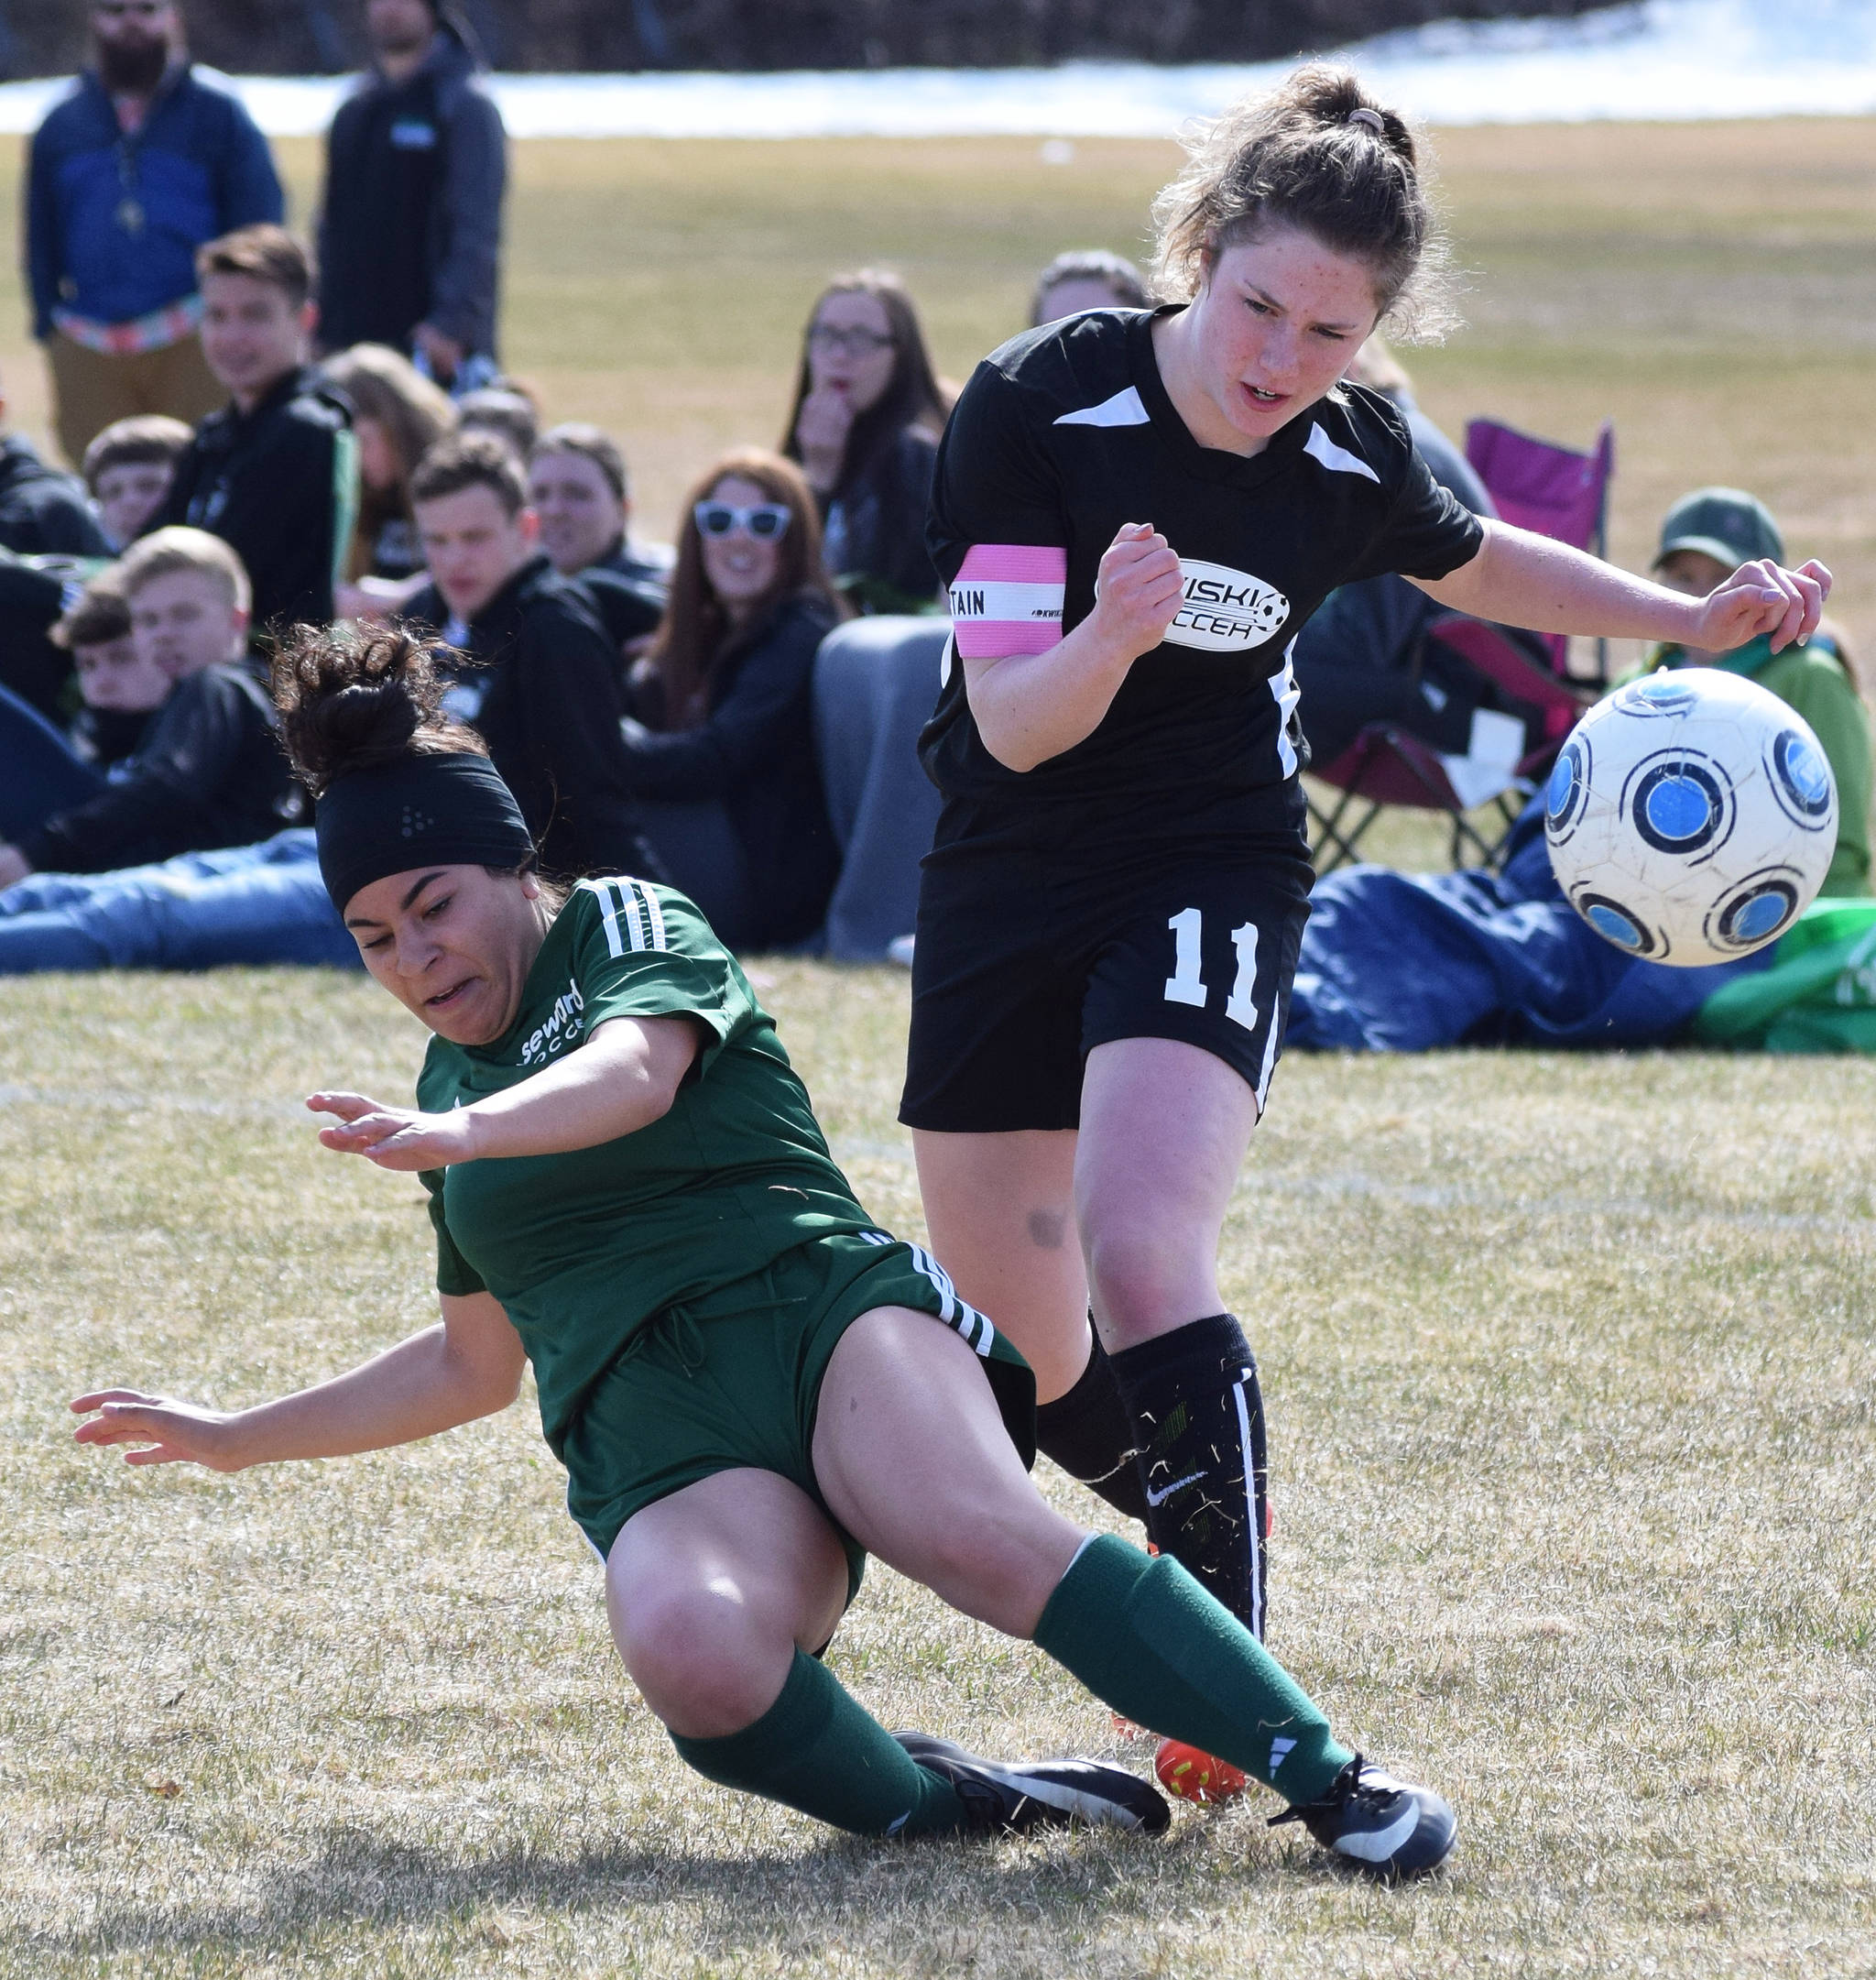 Seward’s Naomi Ifflander attempts to knock the ball from Nikiski’s Jordyn Stock (11) Friday afternoon in a Peninsula Conference contest at Nikiski High School. (Photo by Joey Klecka/Peninsula Clarion)